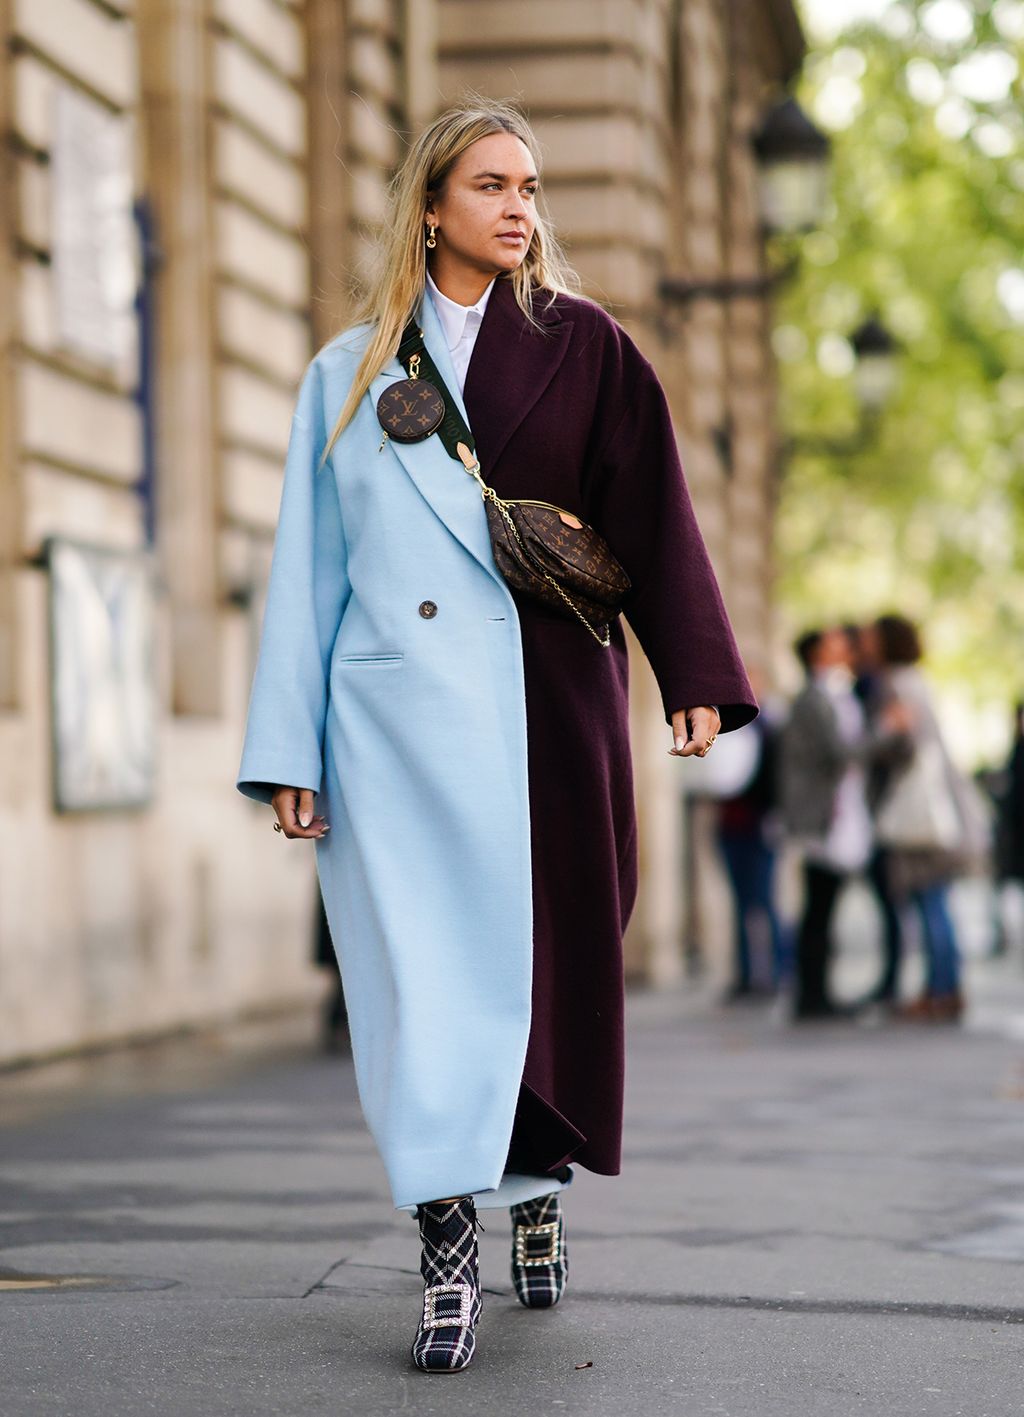 5 Ankle-Boot Trends We'll See Everywhere in 2020 | Who What Wear